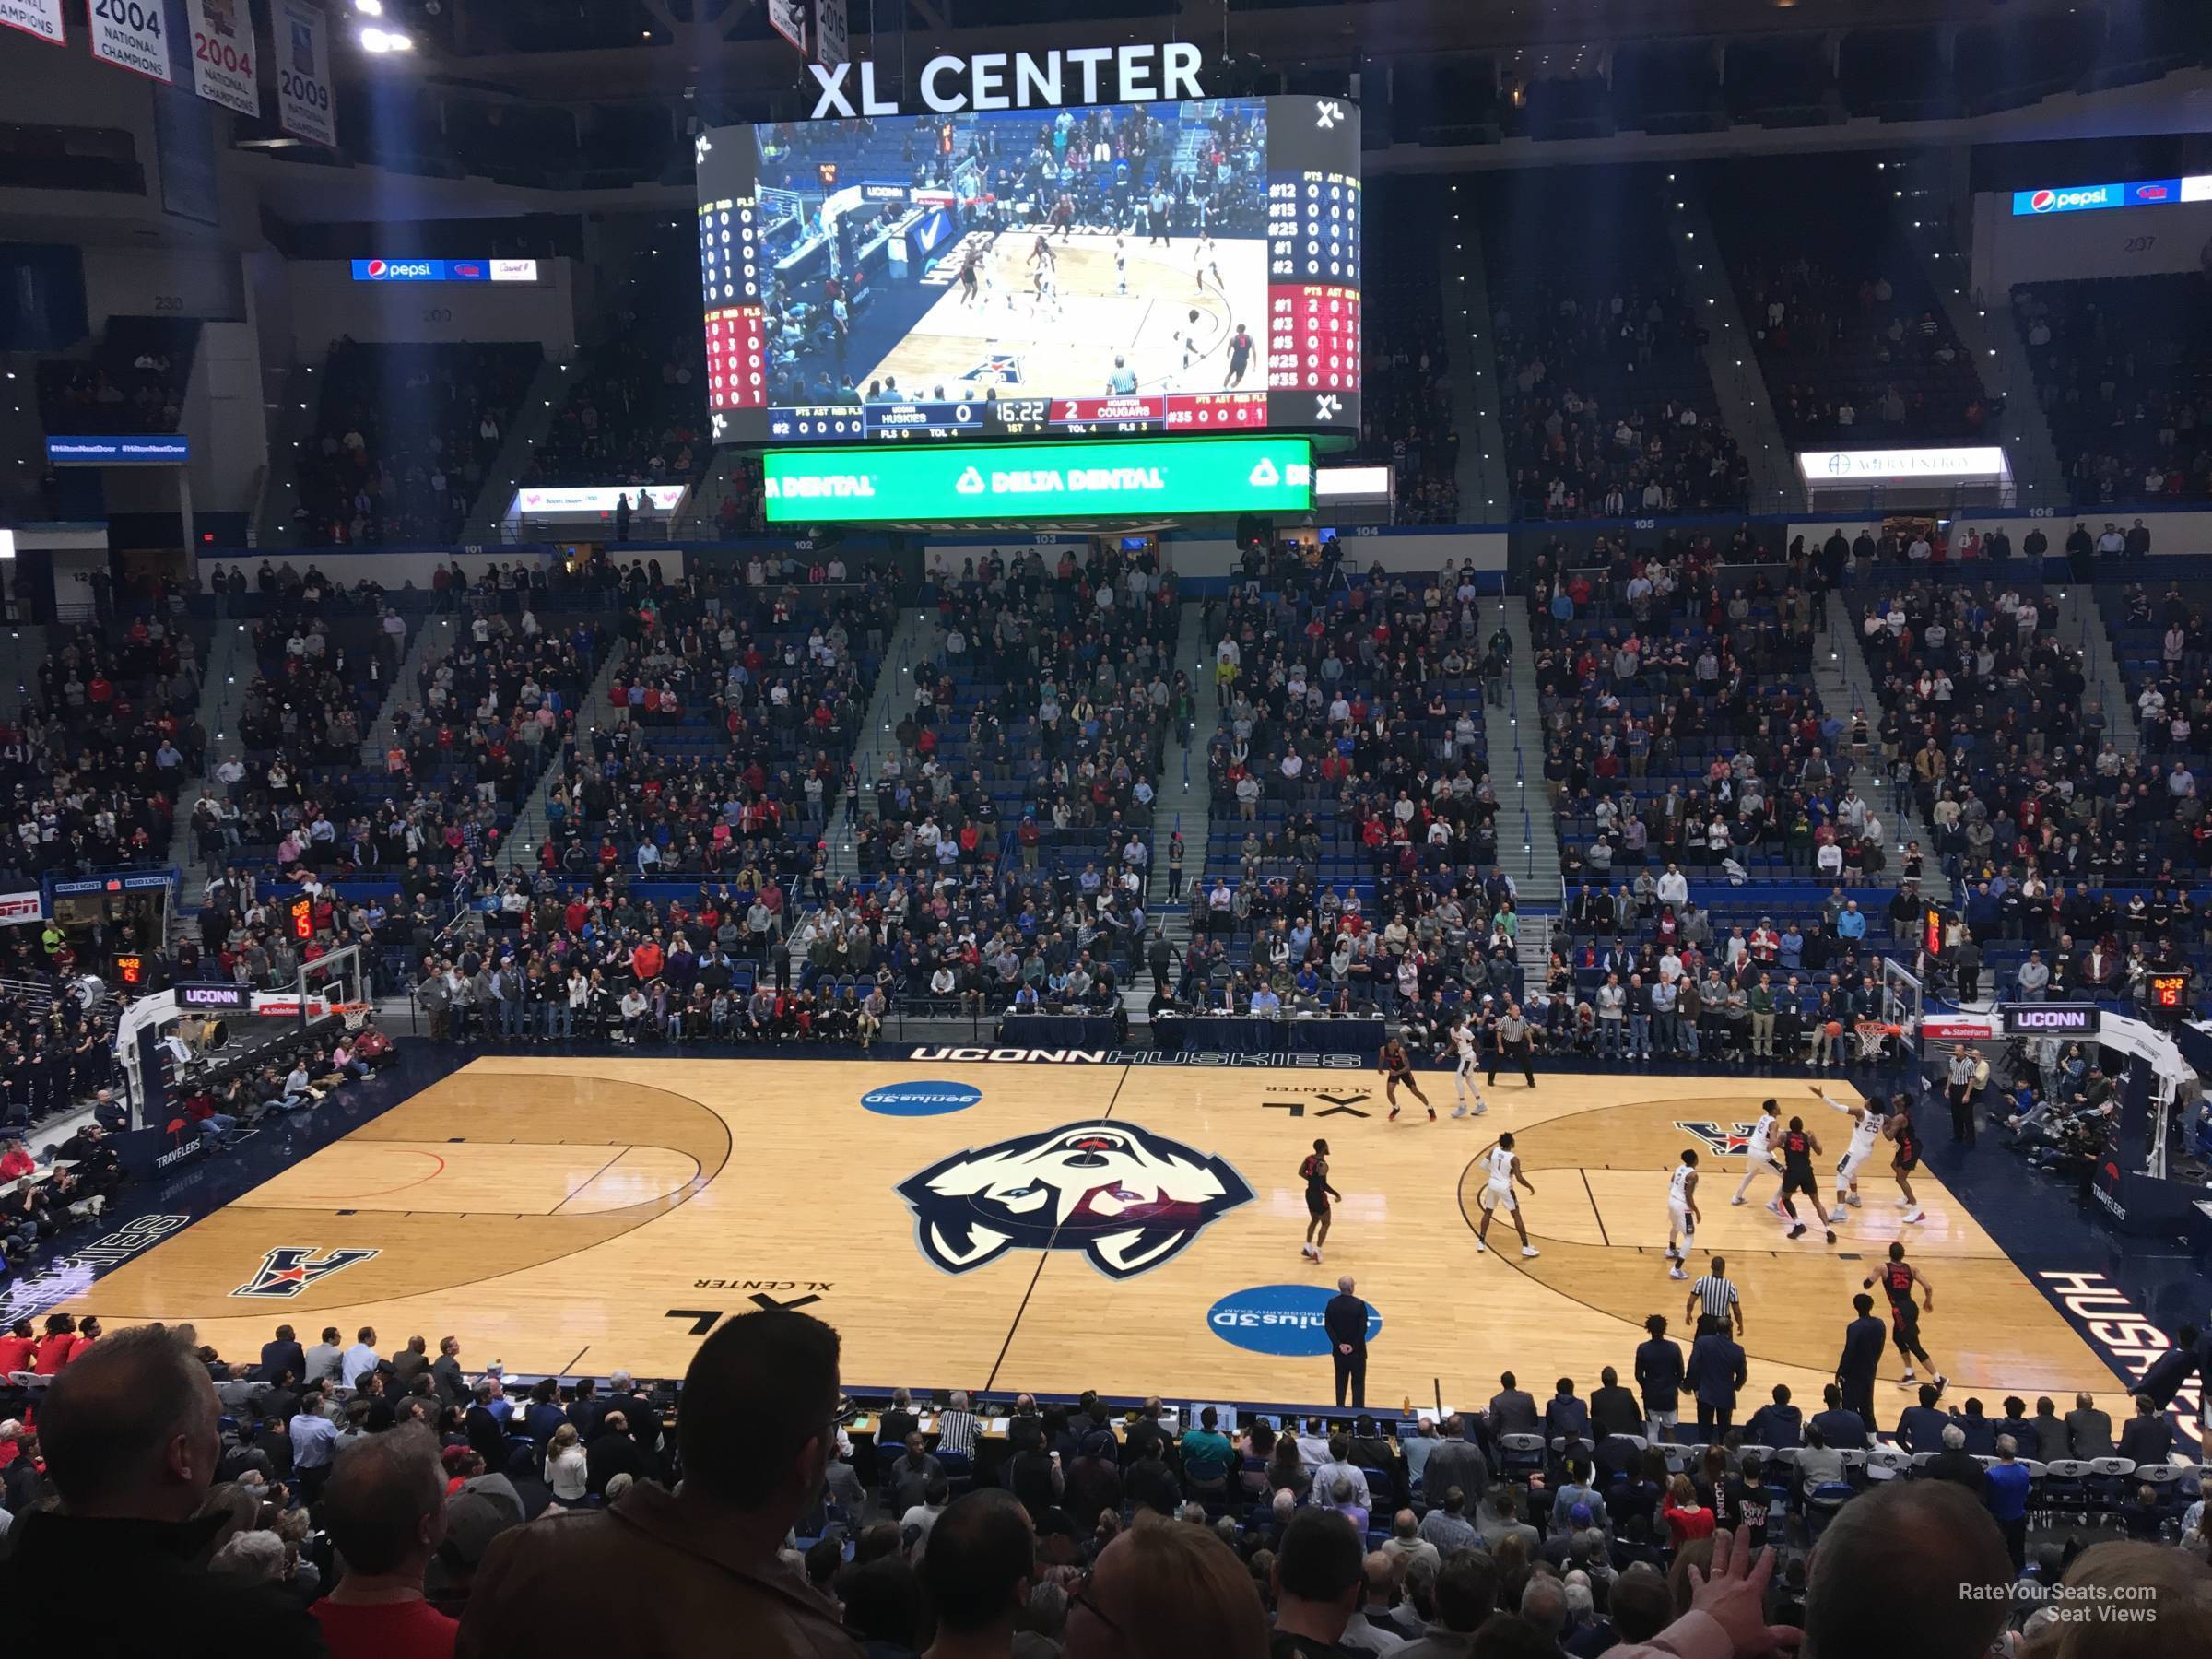 section 115, row r seat view  - xl center